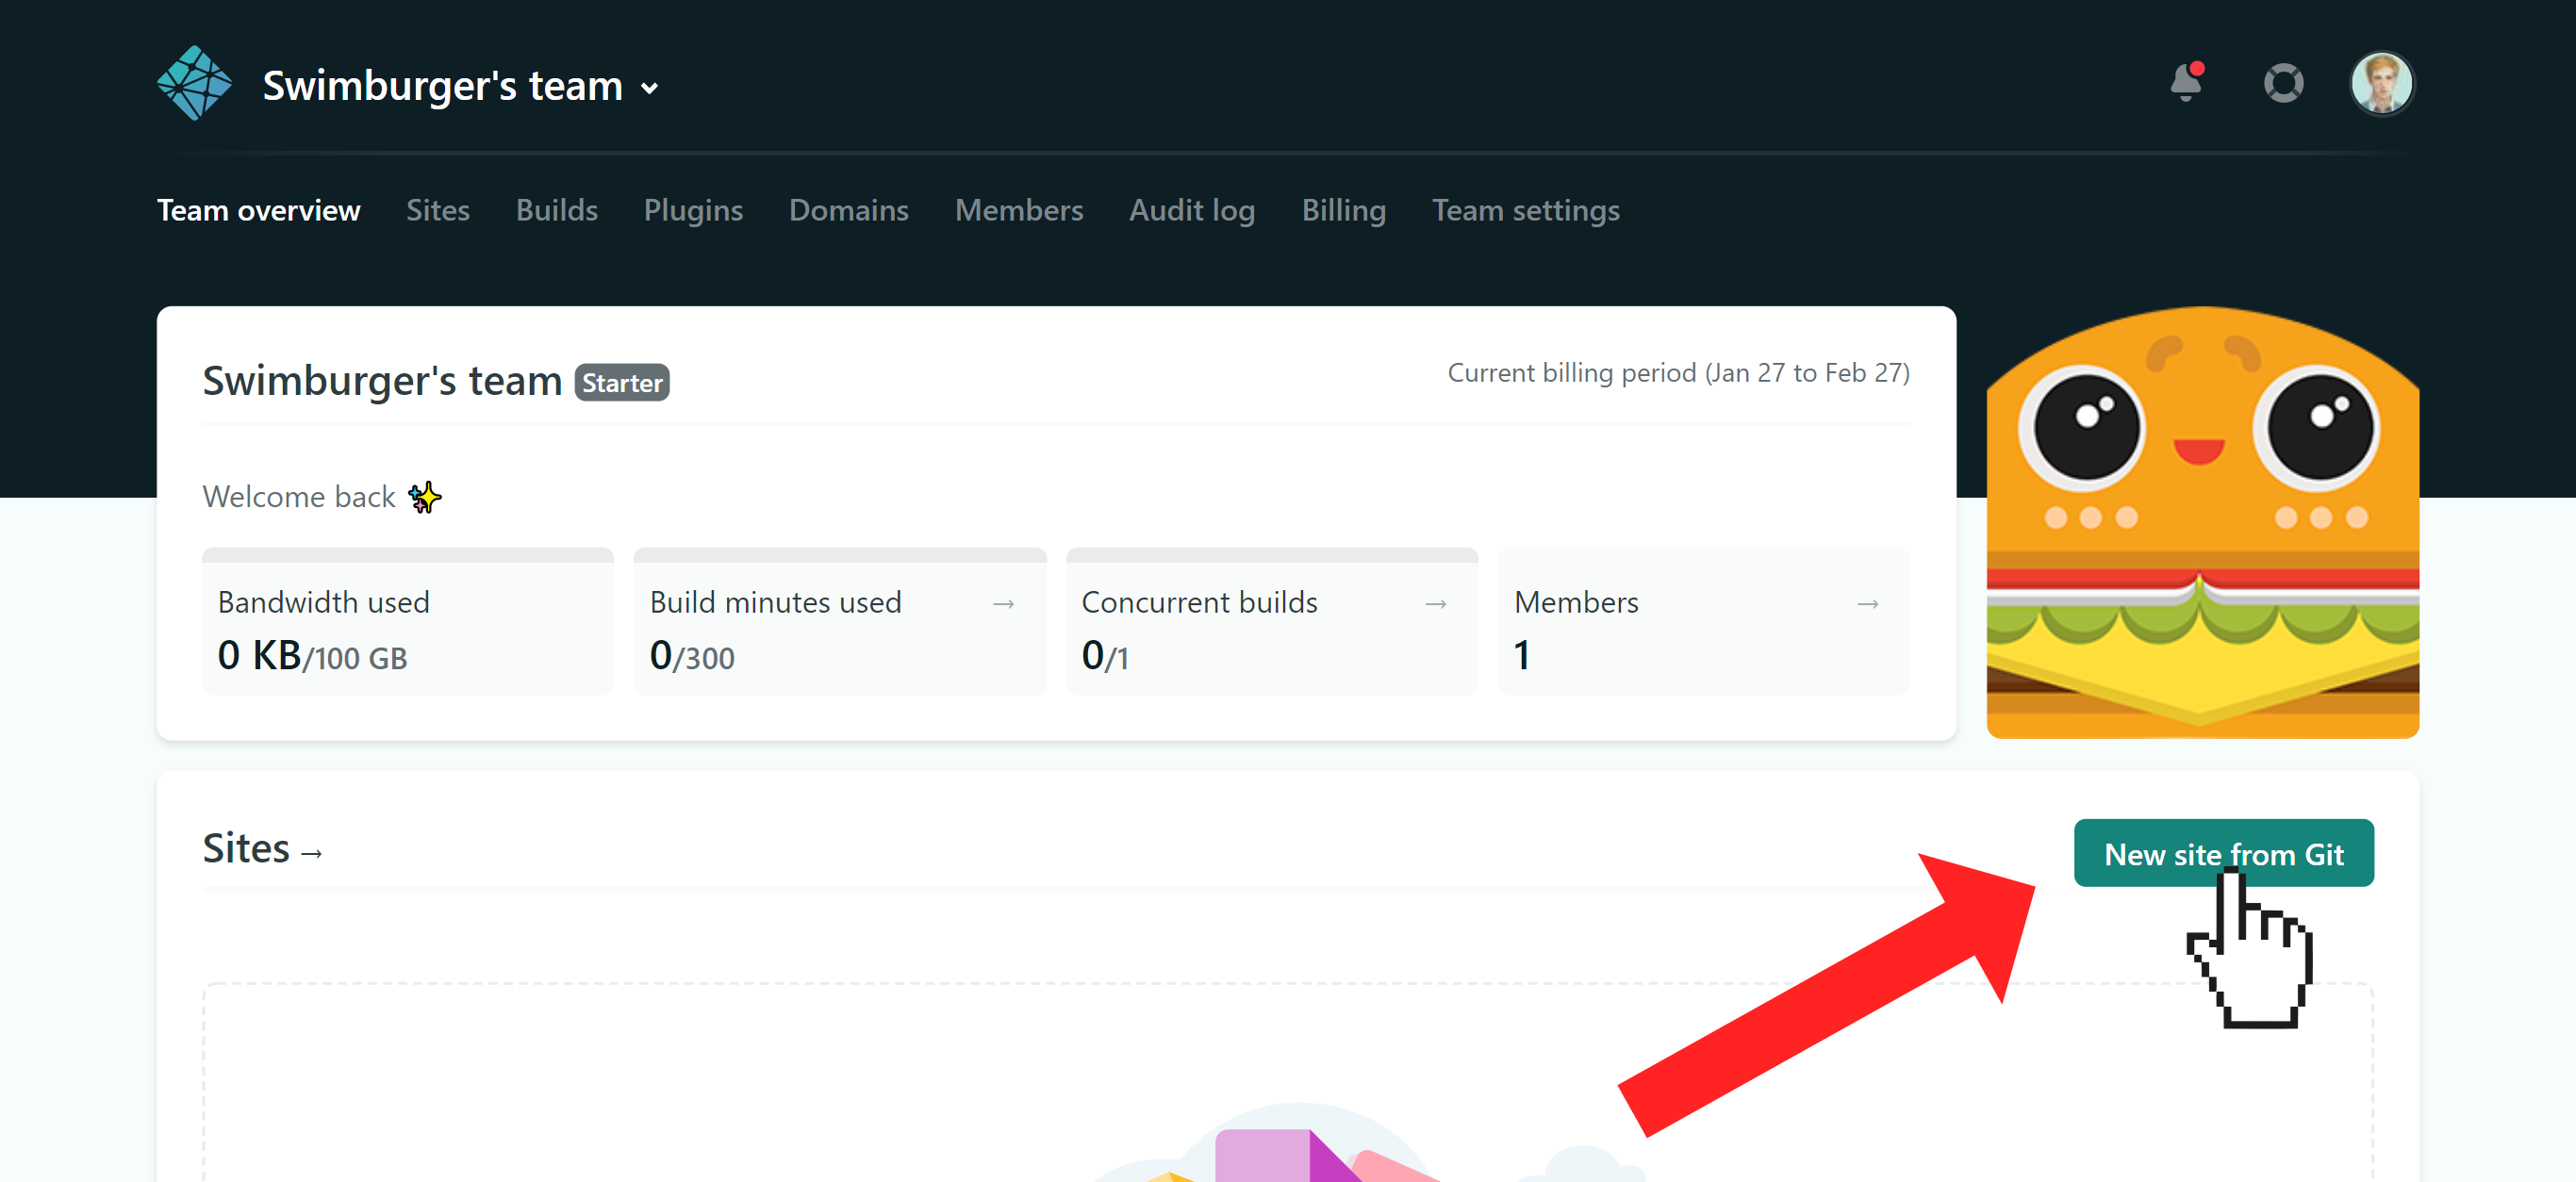 Screenshot of the Netlify team overview page with an arrow pointing to the &quot;New site from Git&quot; button.